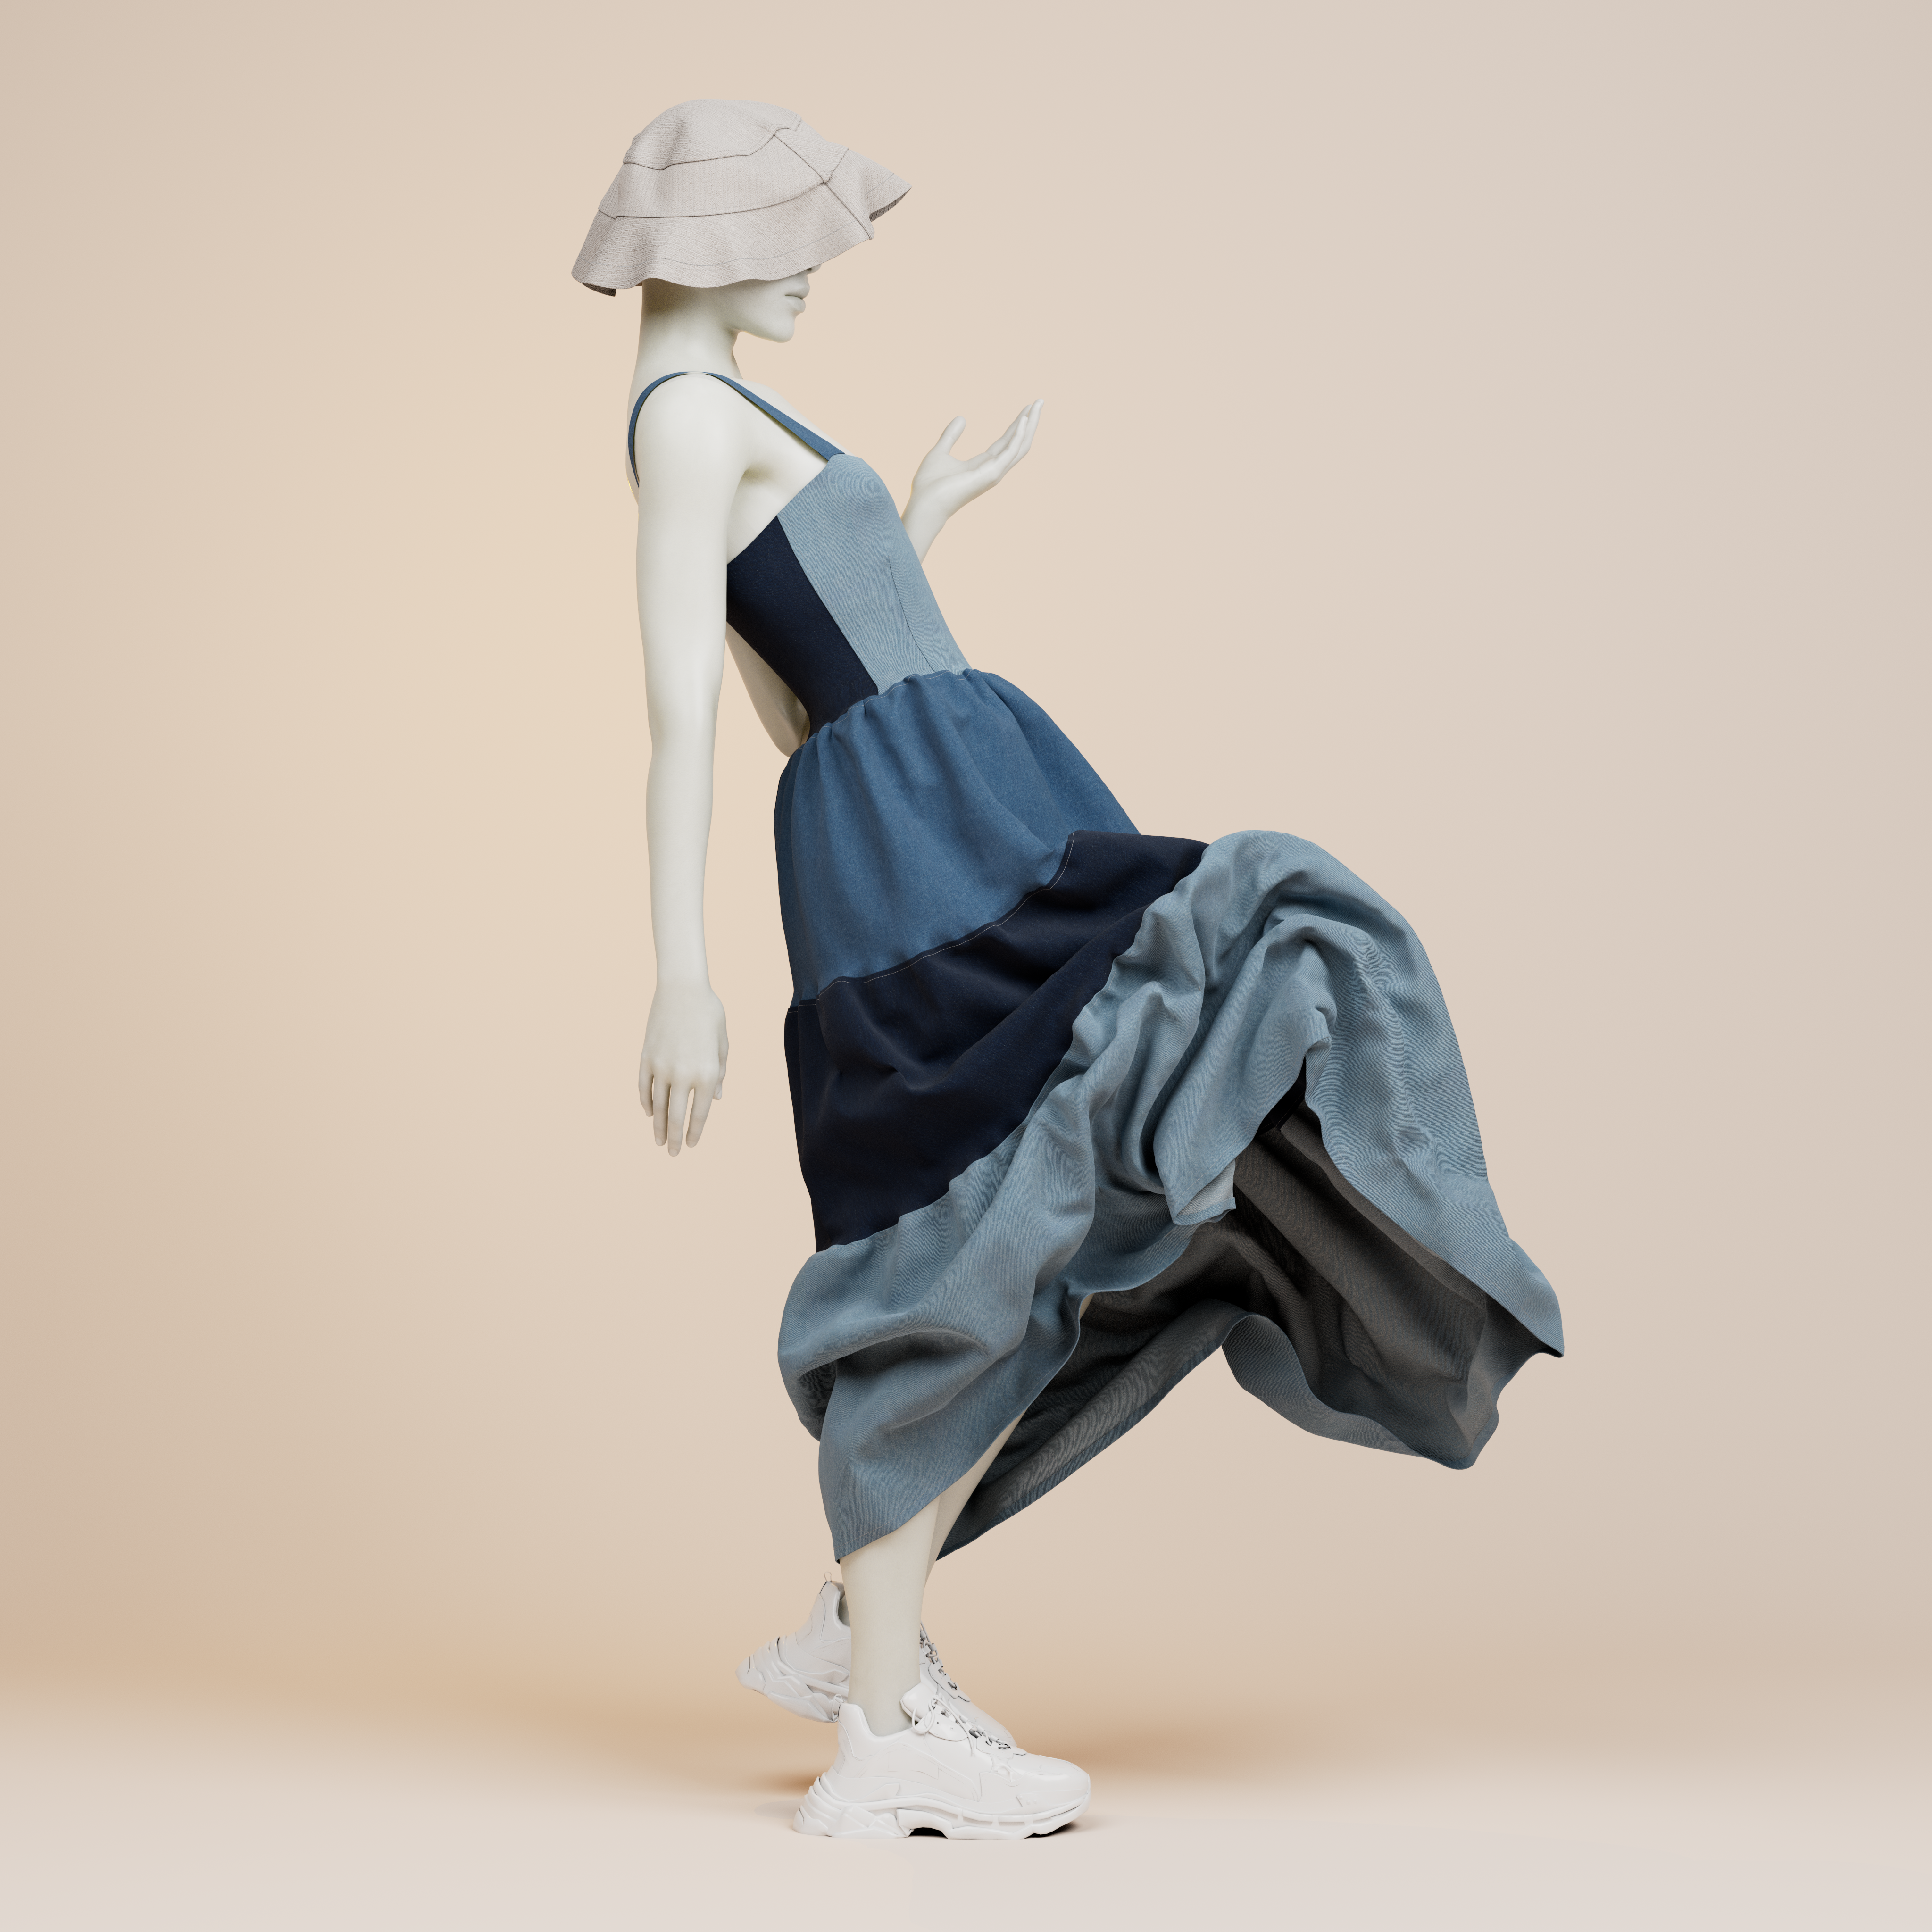 Avatar in a dress rendered in Seddi Author